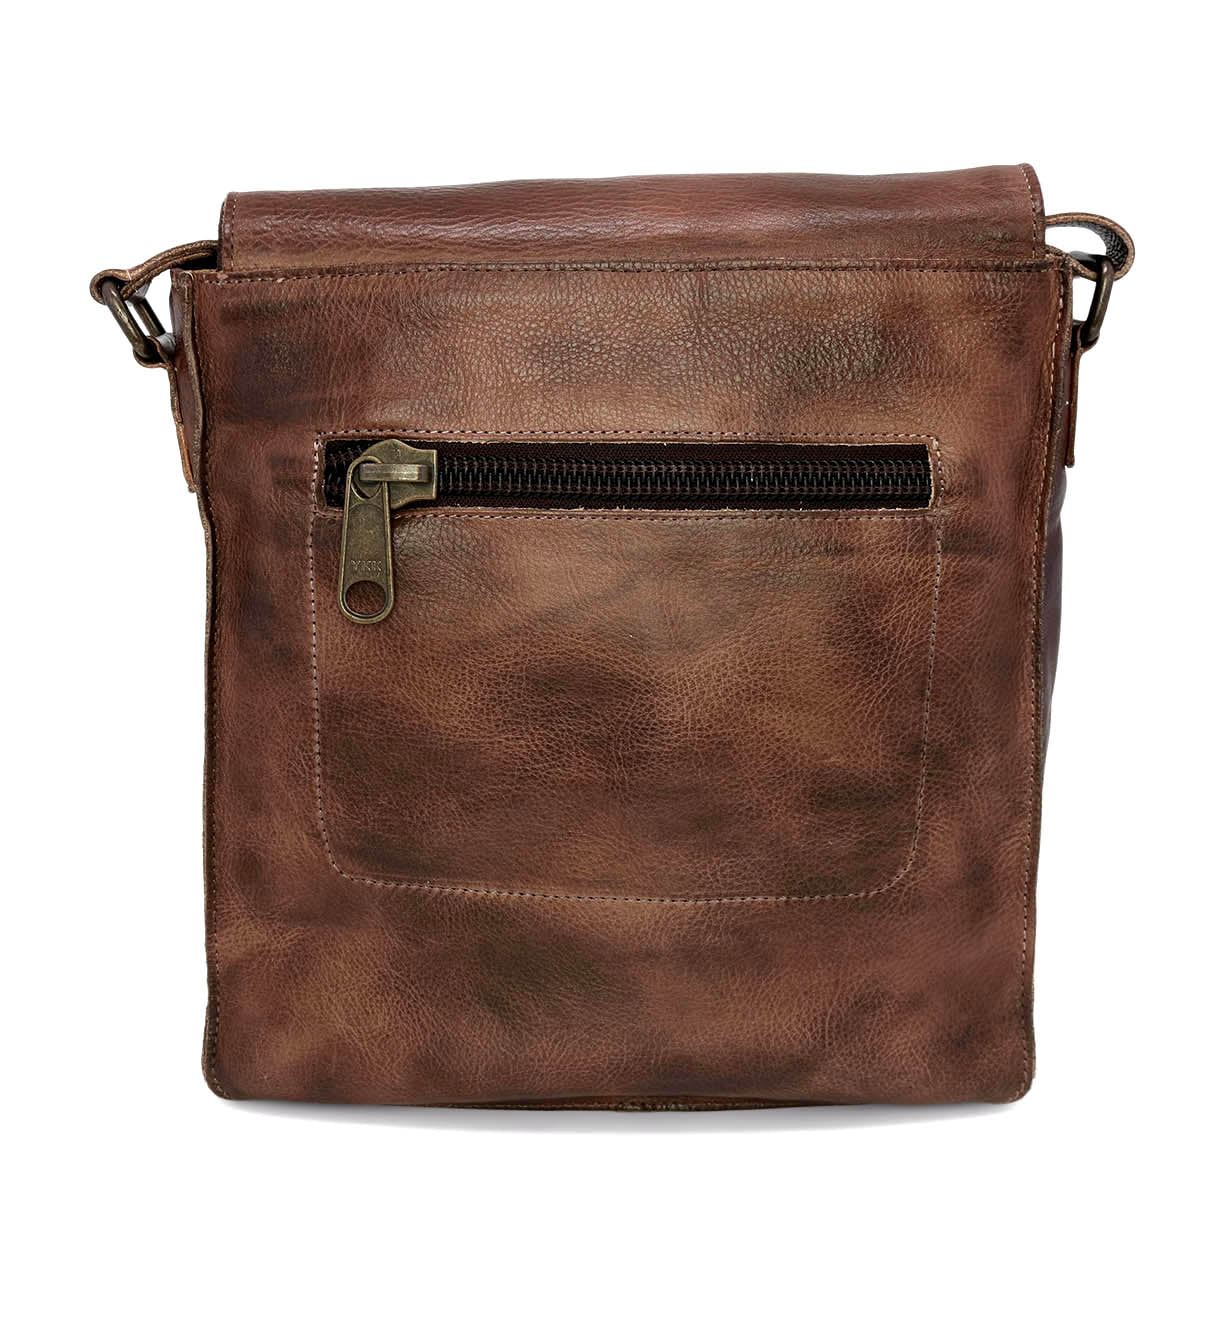 A teak Venice Beach leather bag with a zippered compartment from Bed Stu.